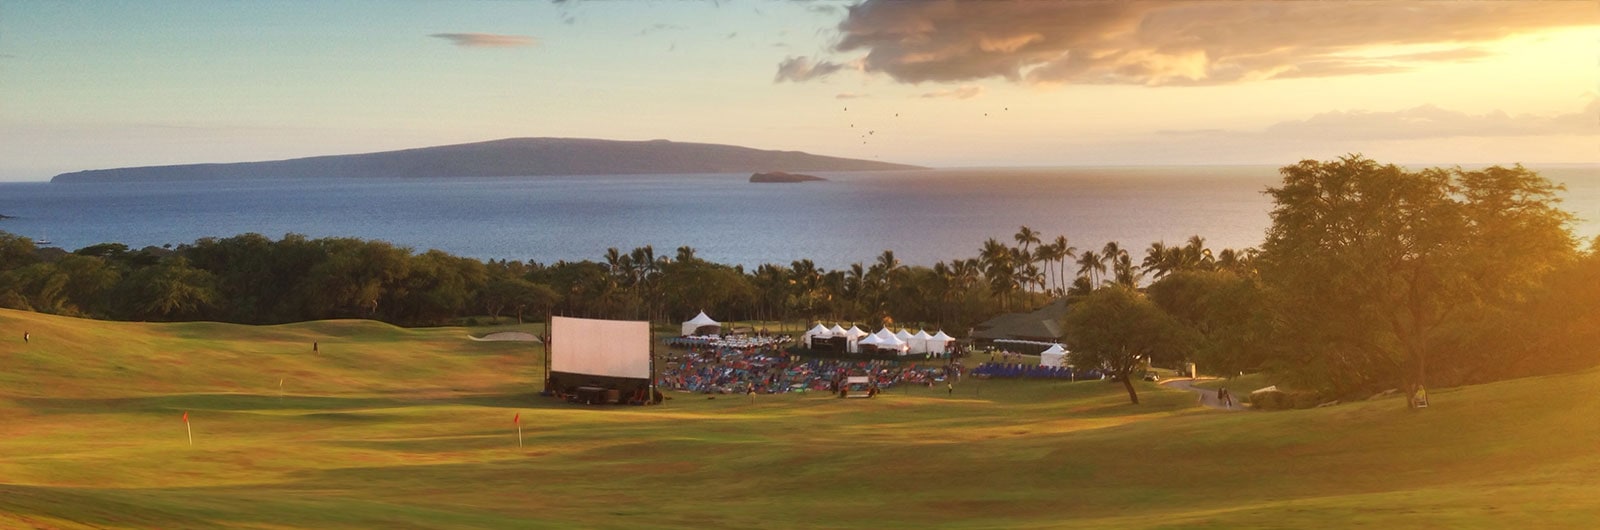 5 Reasons to Attend the Maui Film Festival